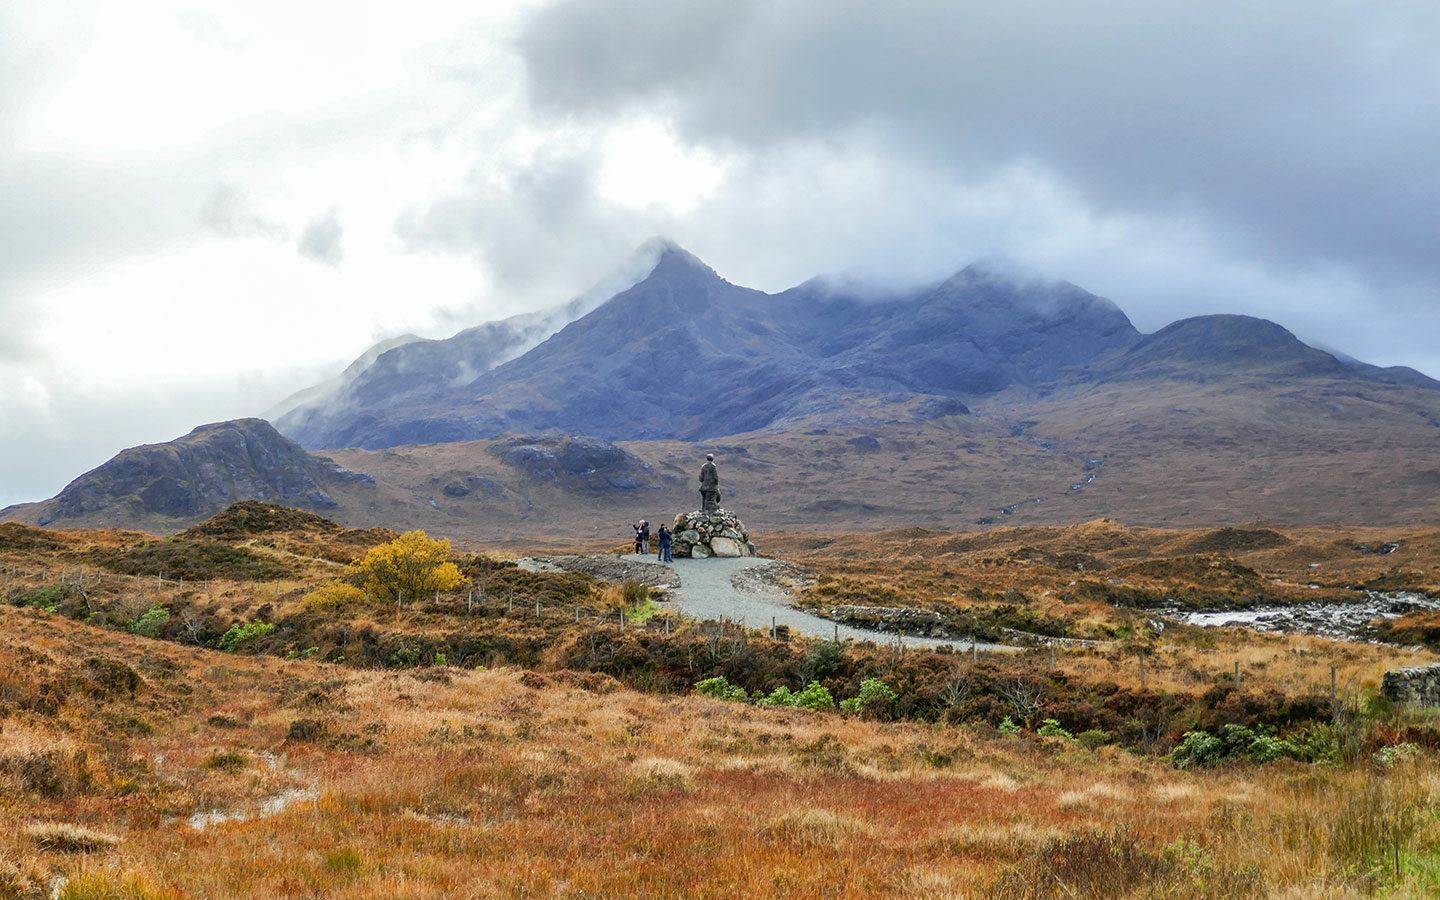 Views of the Cuillin Mountains from Sligachan, Isle of Skye